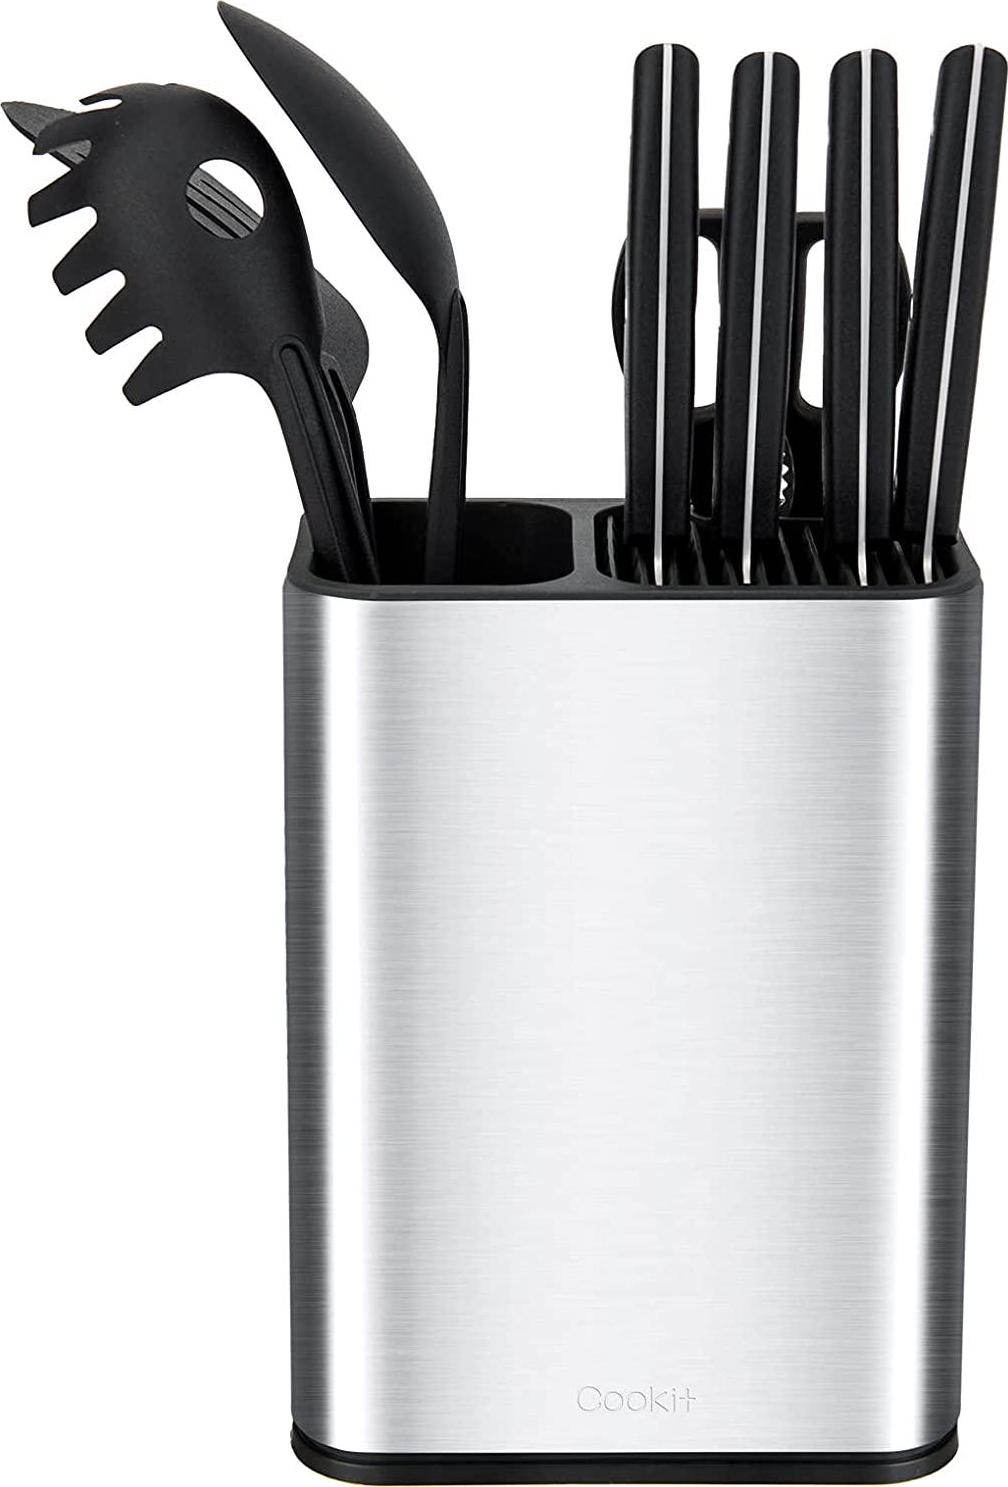 Cookit, Knife Block - Cookit kitchen Universal Knife Holder without Knives, Stainless Steel Utensil Holders Space Saver Multi-function Knife Utensil Organizer, Detachable Knife Storage with Scissors Slot